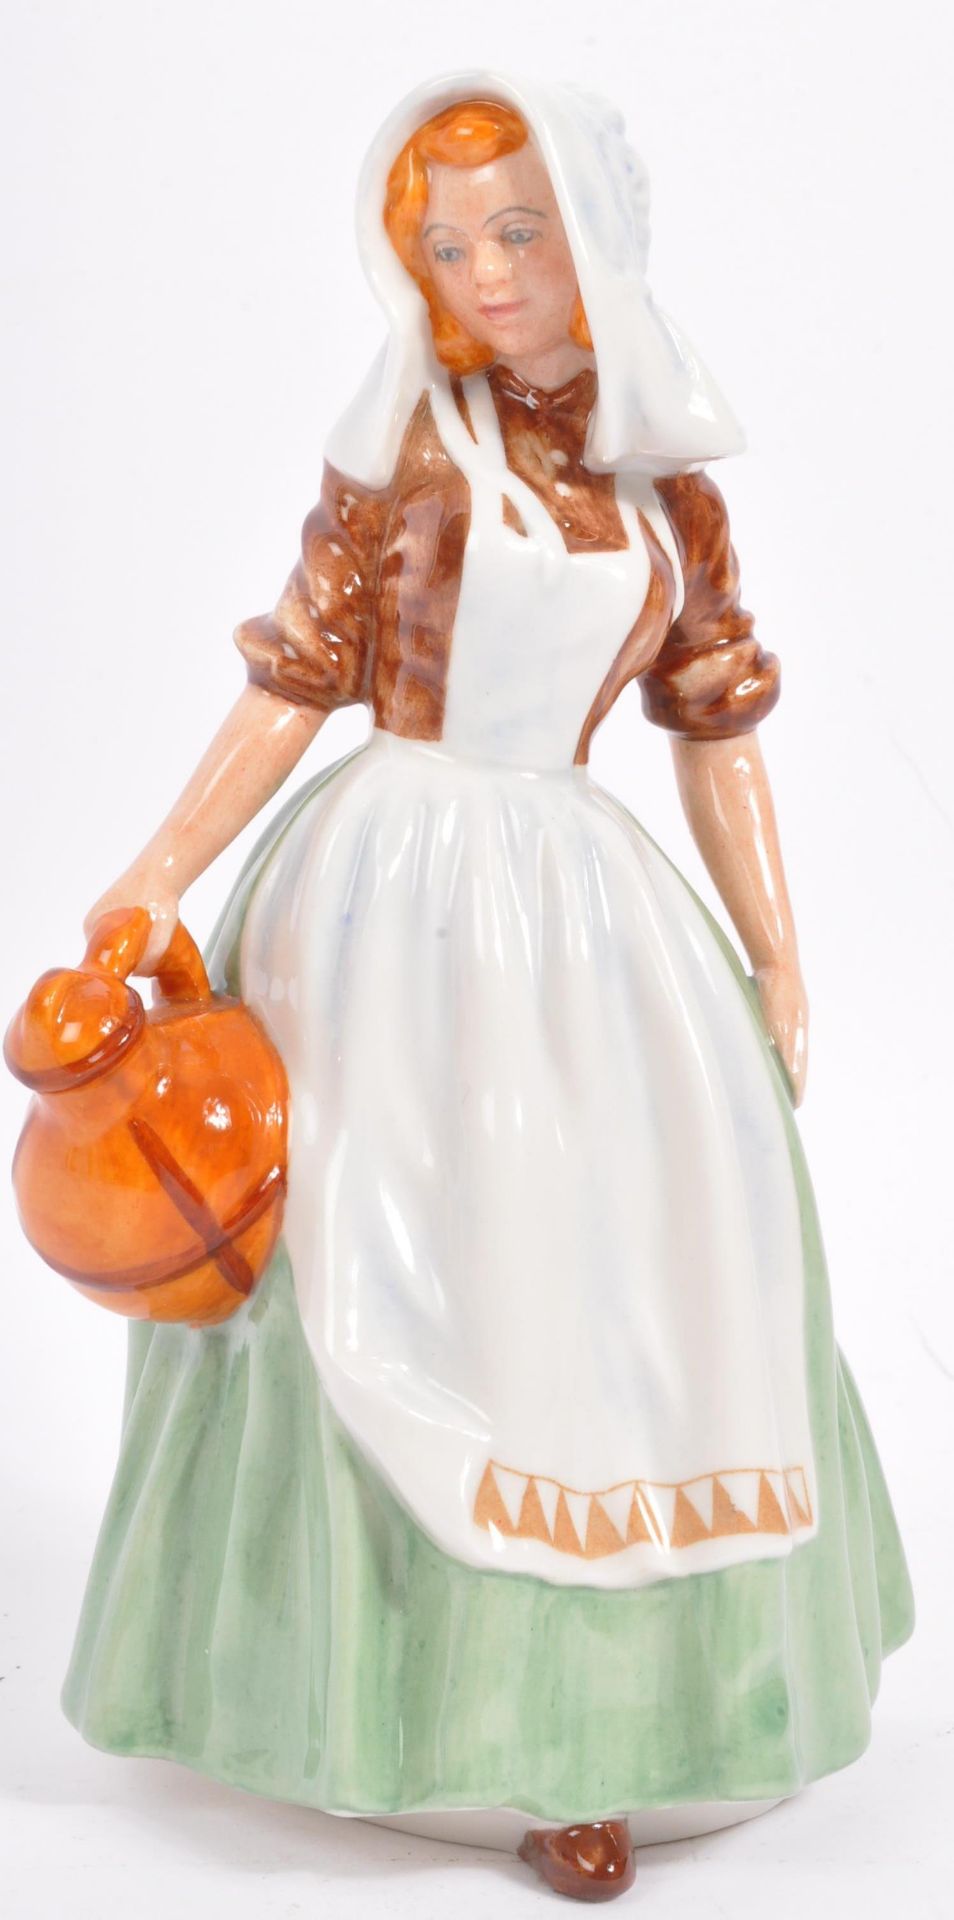 A COLLECTION OF ROYAL DOULTON & EXCLUSIVE FIGURINES - Image 6 of 8